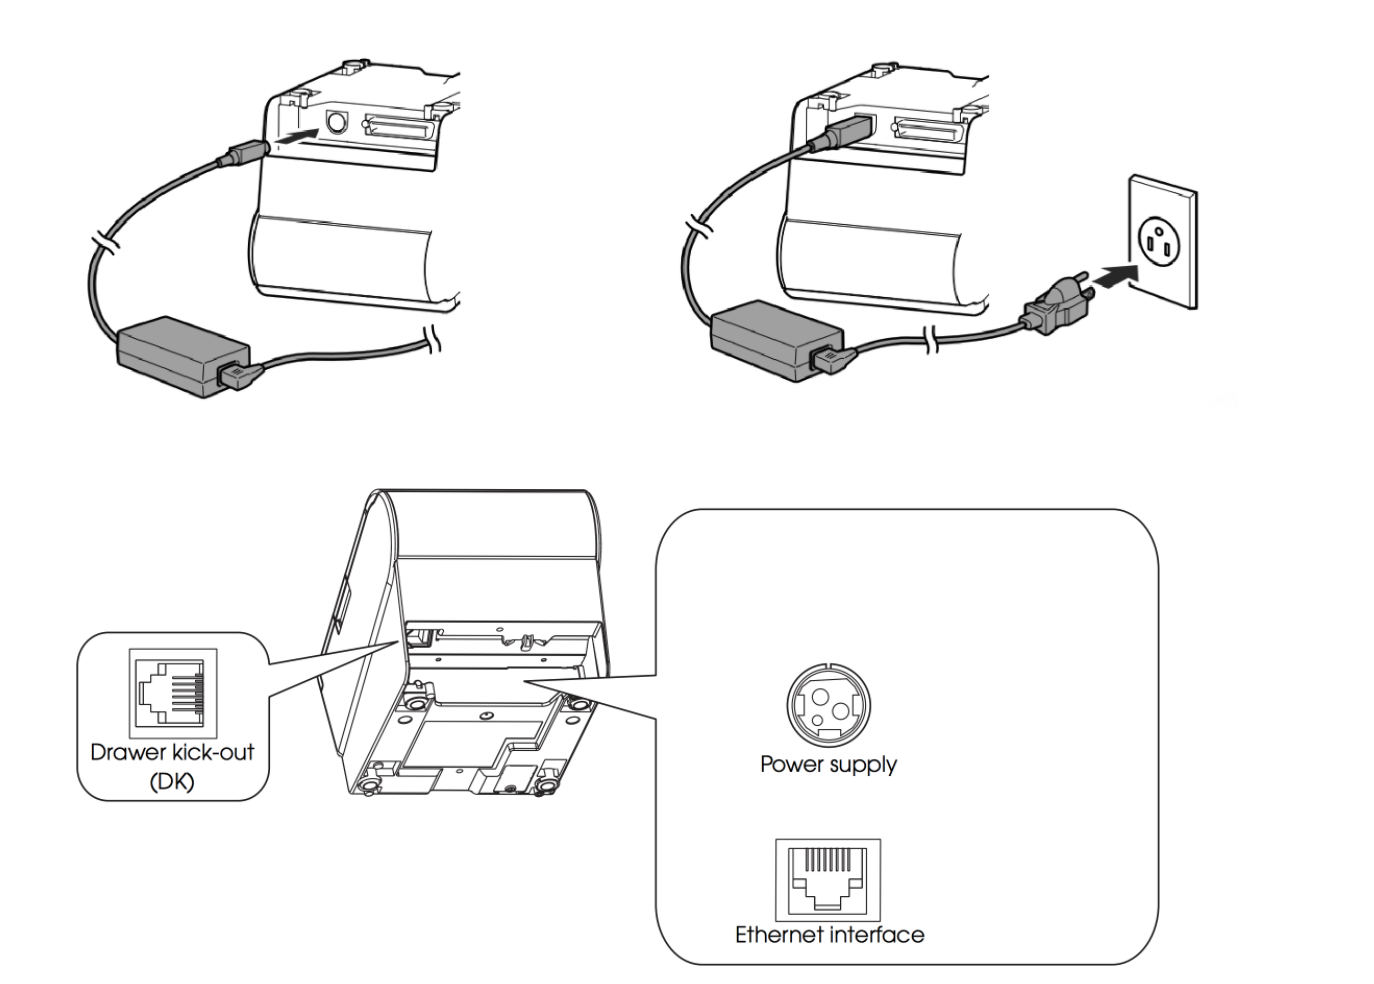 Image_of_printer_power_ports_and_cable.png